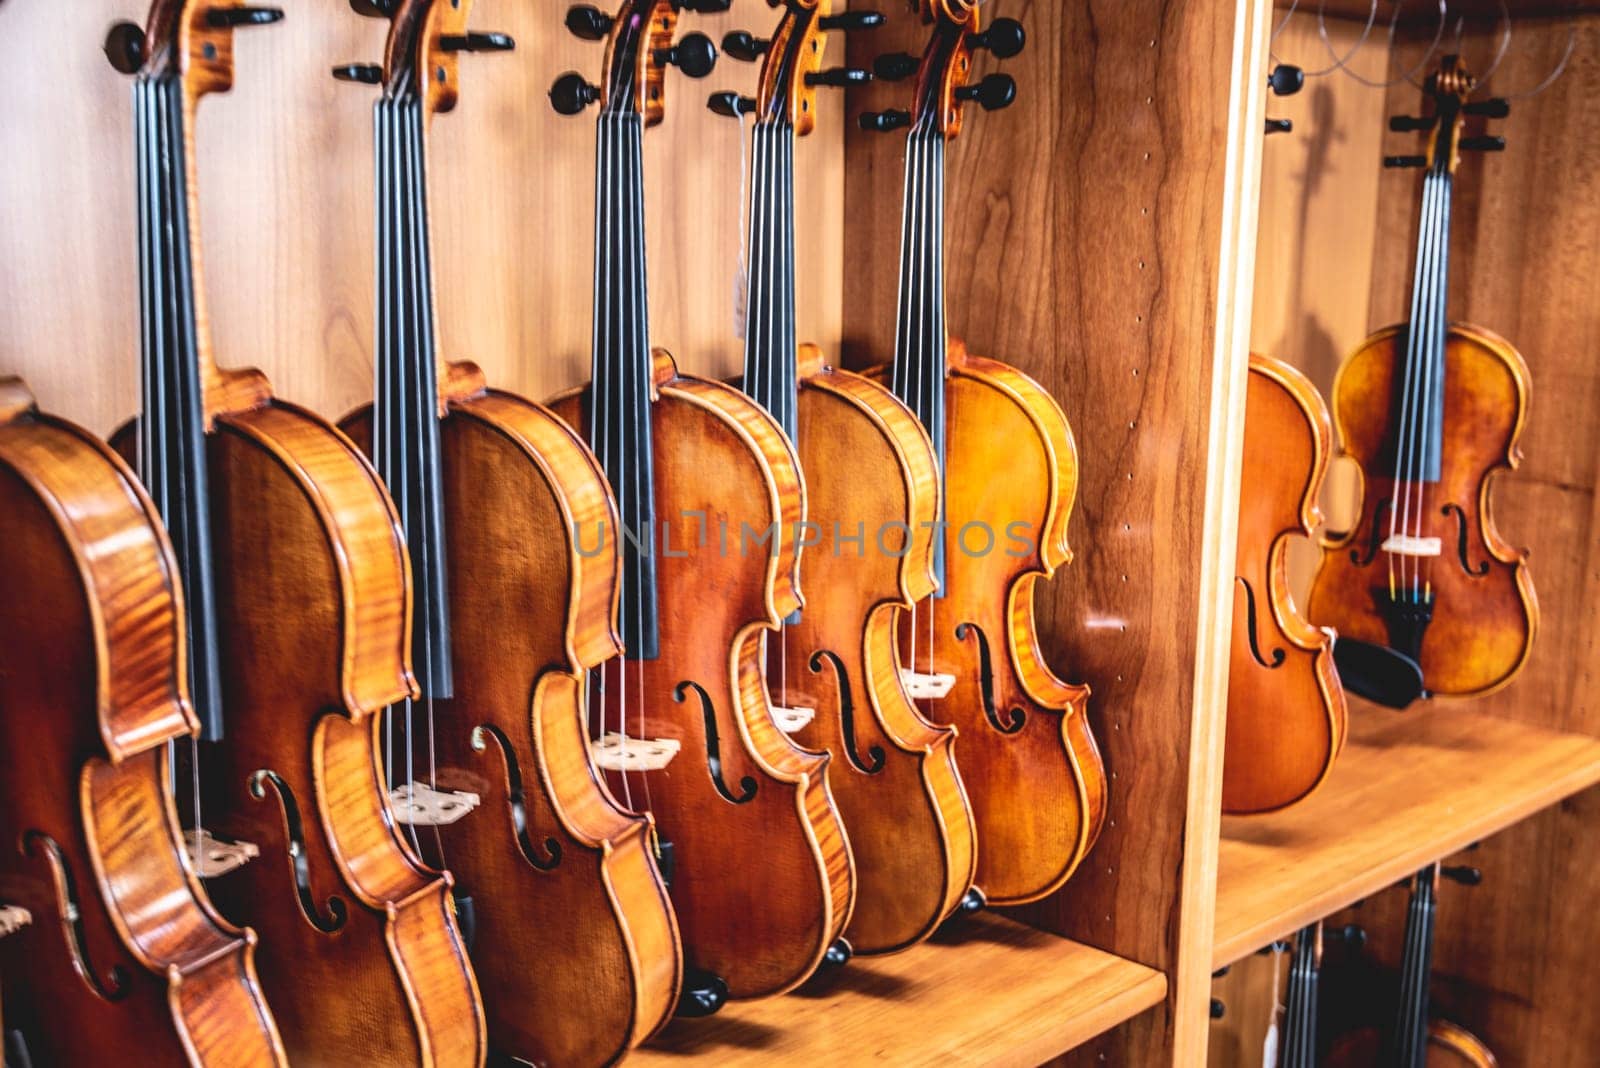 Violins are lined on wooden shelve in musical instruments store